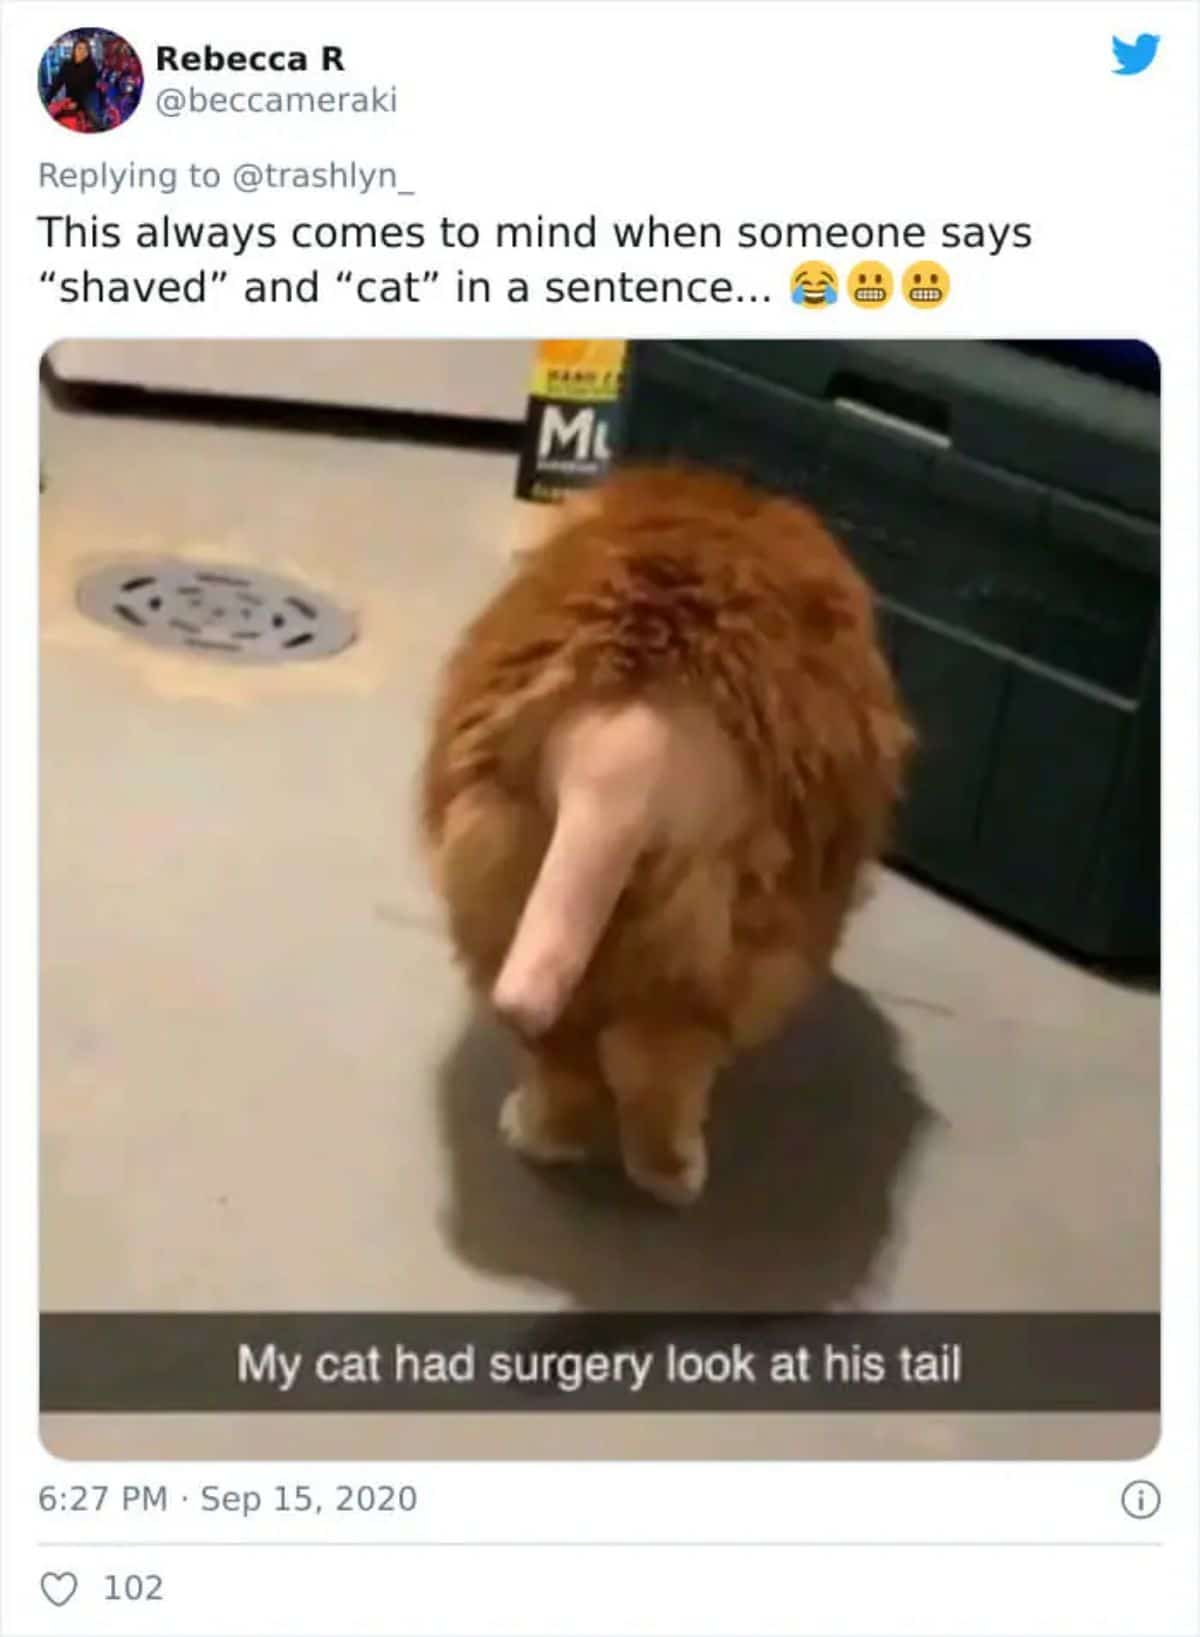 tweet with a photo of the back of an orange cat with the tail shaved